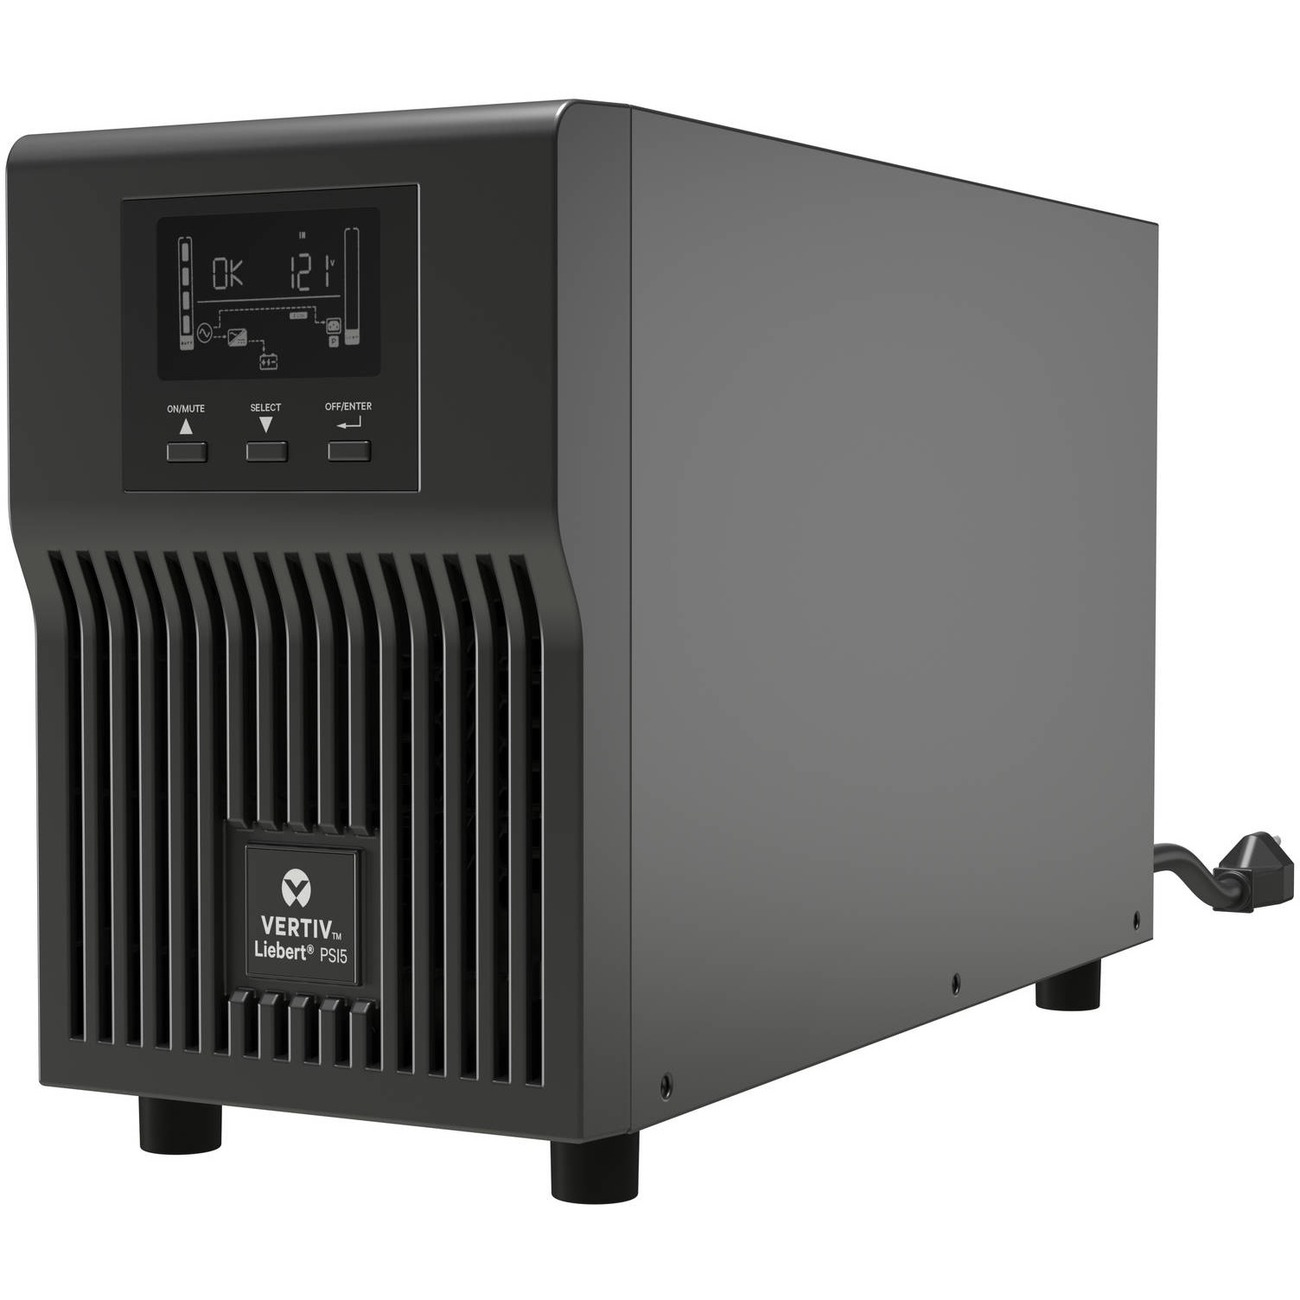 Liebert Vertiv Liebert PSI5 UPS 1100VA 990W 120V Line Interactive AVR  Mini Tower UPS, 0.9 Power Factor Plug-and-Play, Pure Sine Wave Output on  Battery, Programmable Outlets, With Option for Remote Monitoring and 5- year Total Coverage